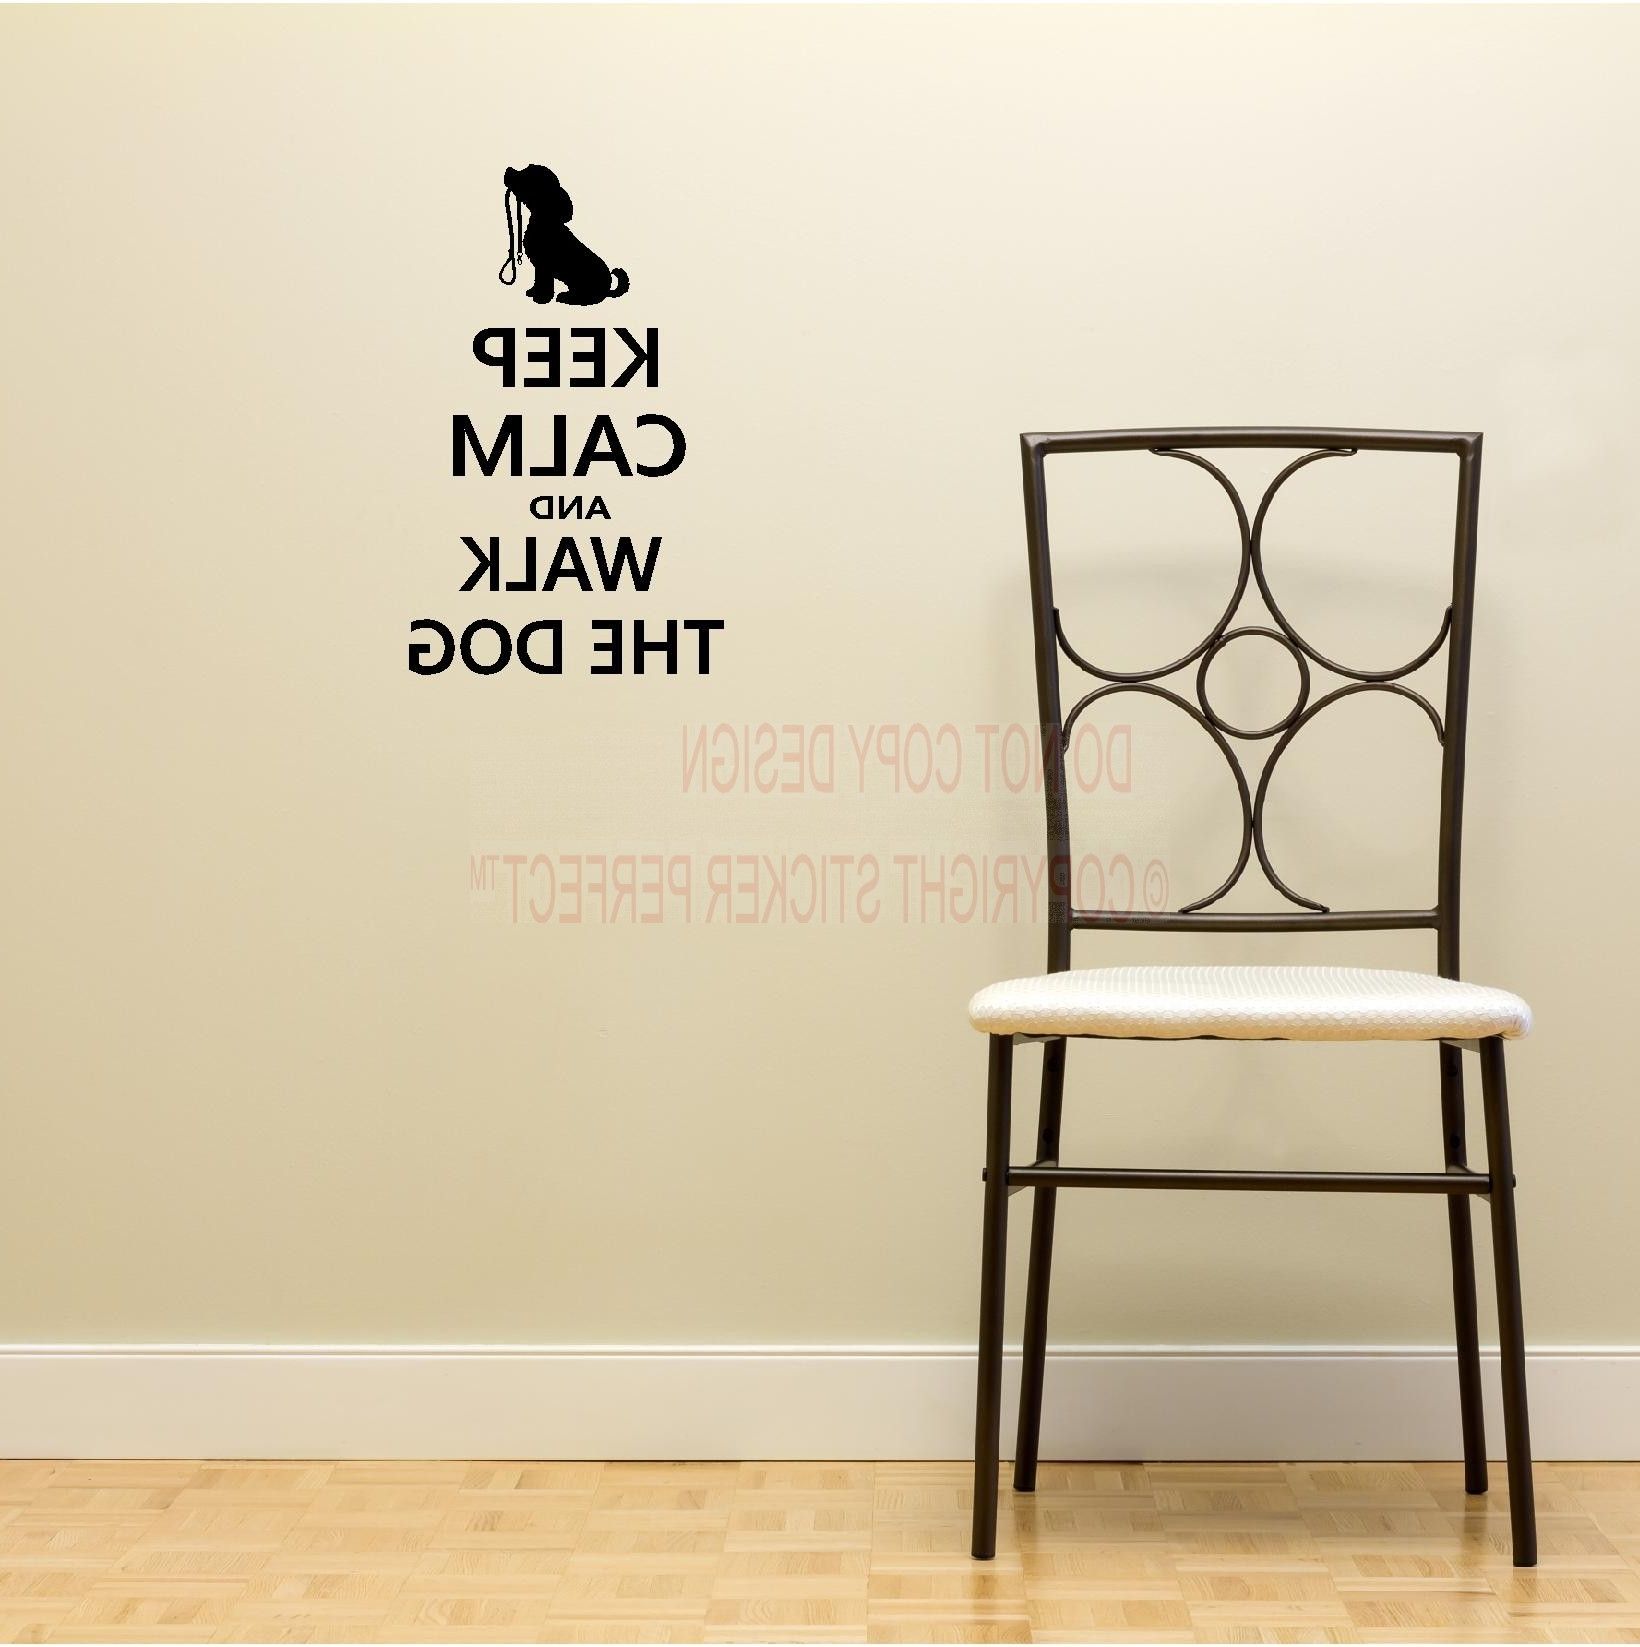 Trendy Dog Sayings Wall Art Inside 2 Keep Calm And Walk The Dog Decals Cute Puppy Wall Art Wall (View 1 of 15)